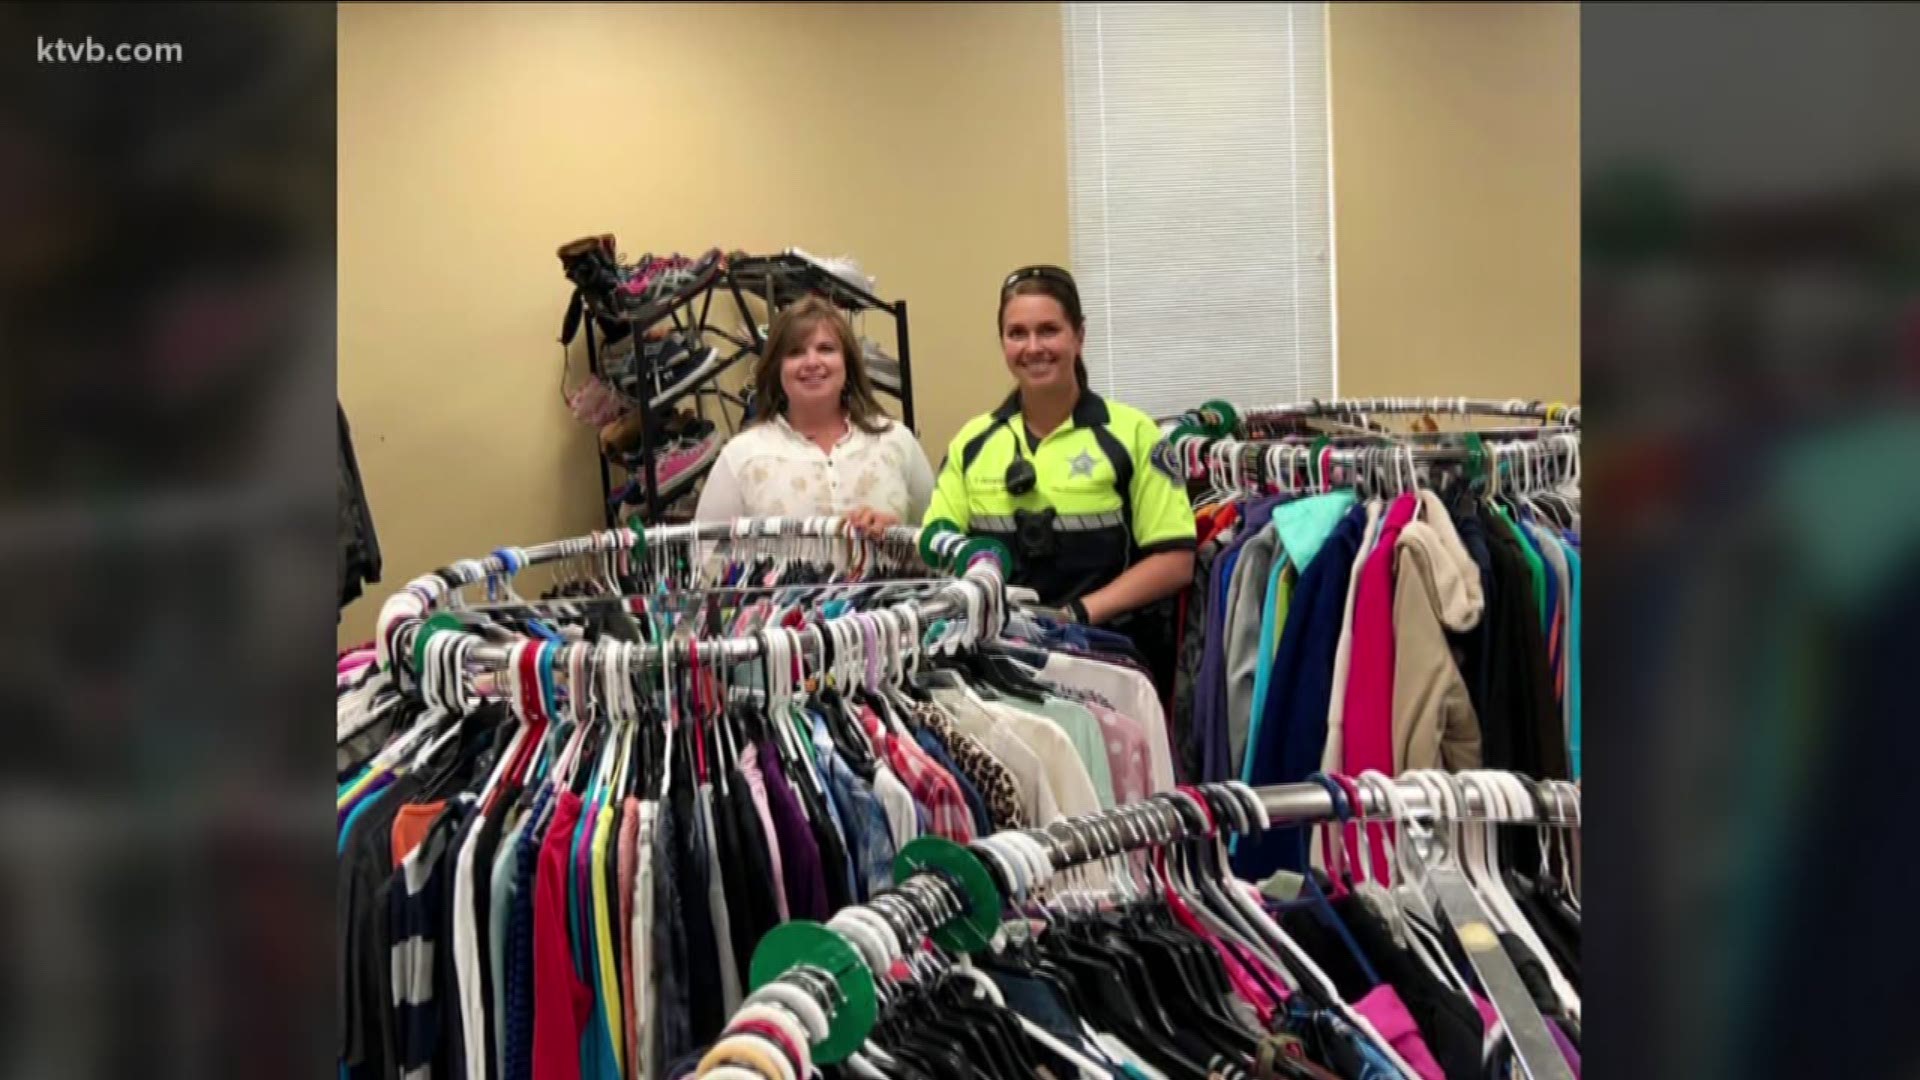 The Cherokee Closet is a place where students in need can come to get basic necessities.